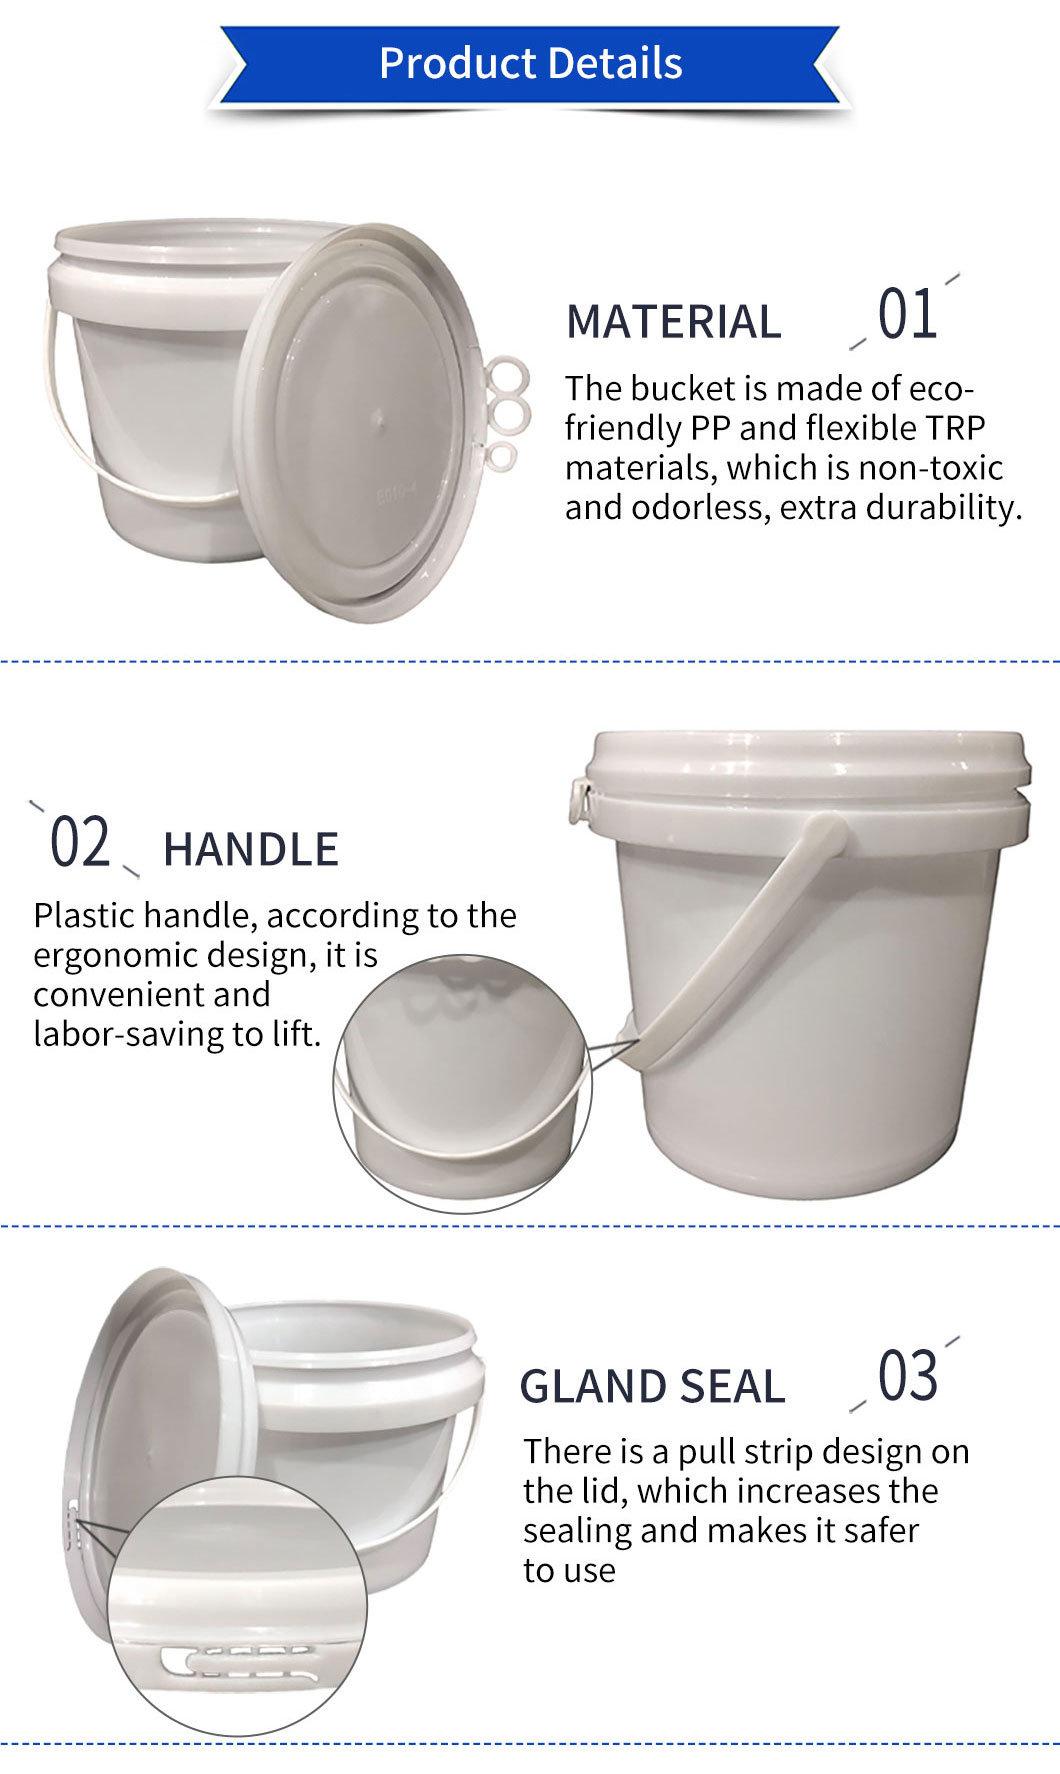 1 Gallon Plastic Bucket with Lid and Handle Heavy Duty